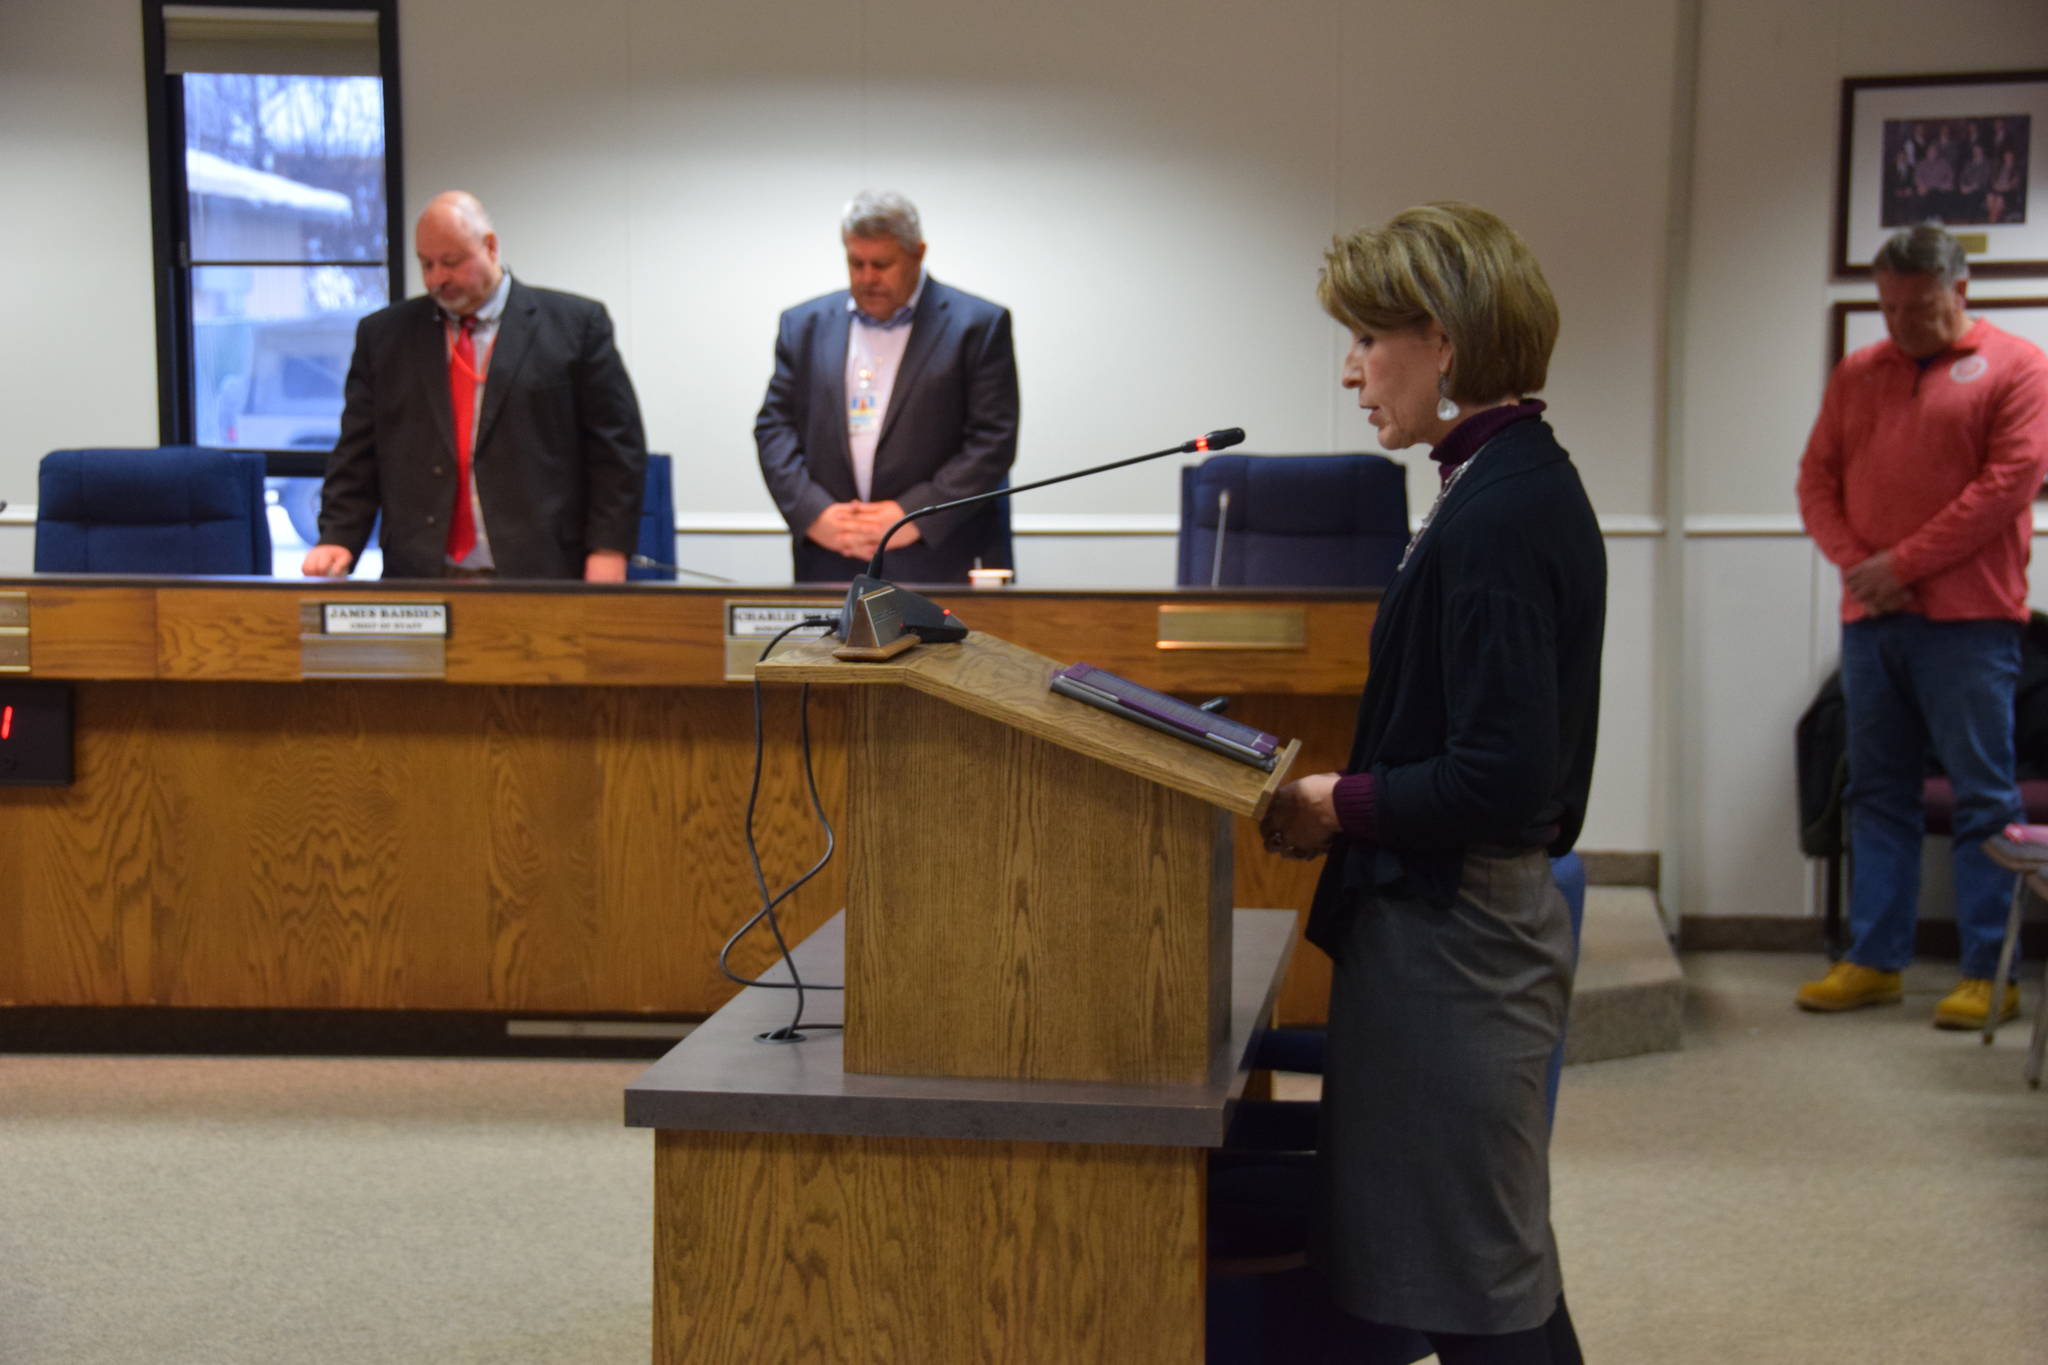 An invocation is given by Debbie Hamilton at the Kenai Peninsula Borough Assembly Meeting in Soldotna on March 5, 2019. (Photo by Brian Mazurek/Peninsula Clarion)                                Debbie Hamilton gives an invocation at the Kenai Peninsula Borough Assembly Meeting in Soldotna on March 5, 2019. (Photo by Brian Mazurek/Peninsula Clarion)